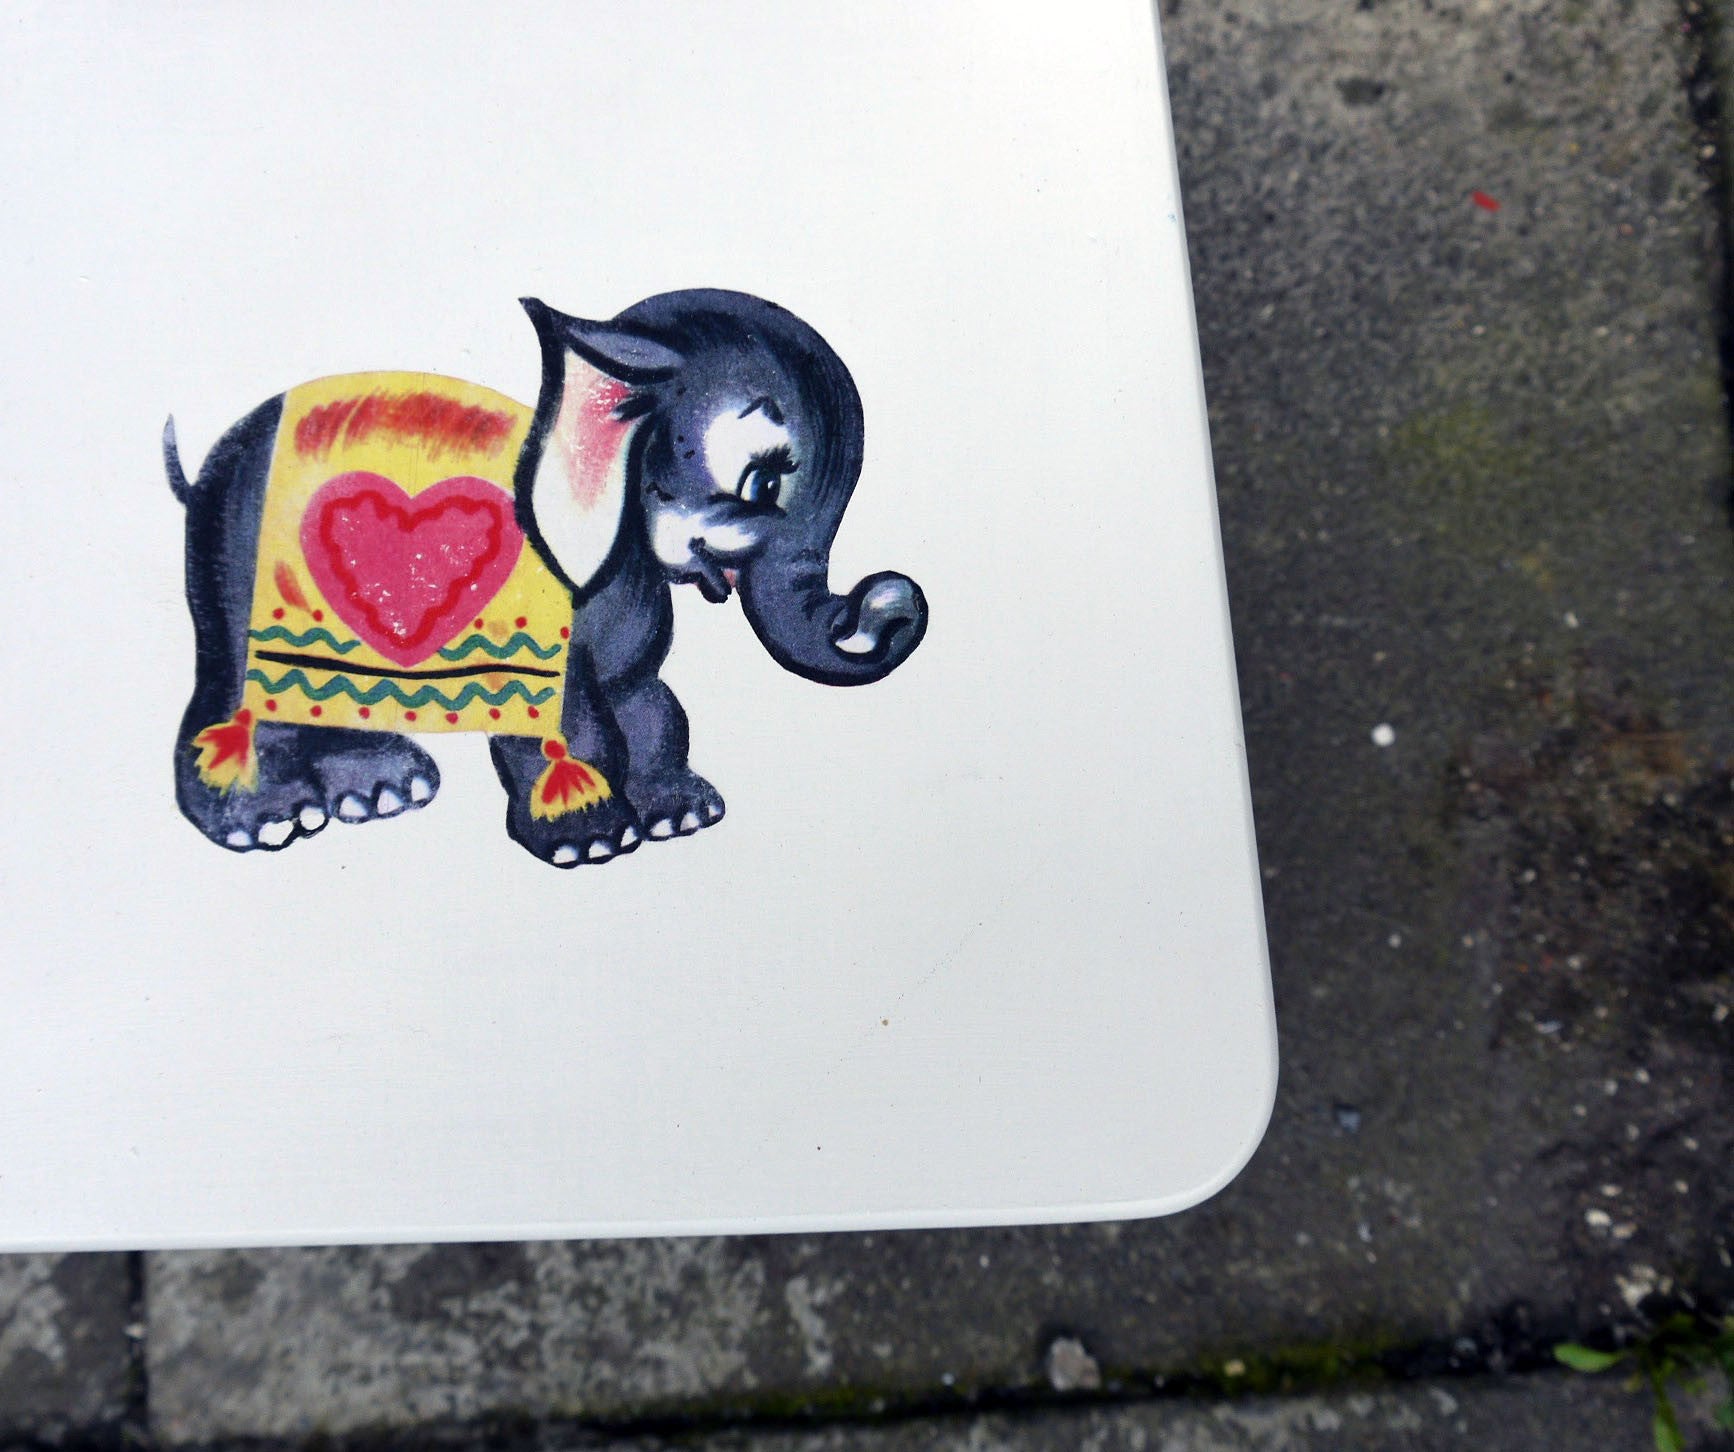 Childs toddler chair painted in Fusion Mineral Paint Casement with retro elephant design